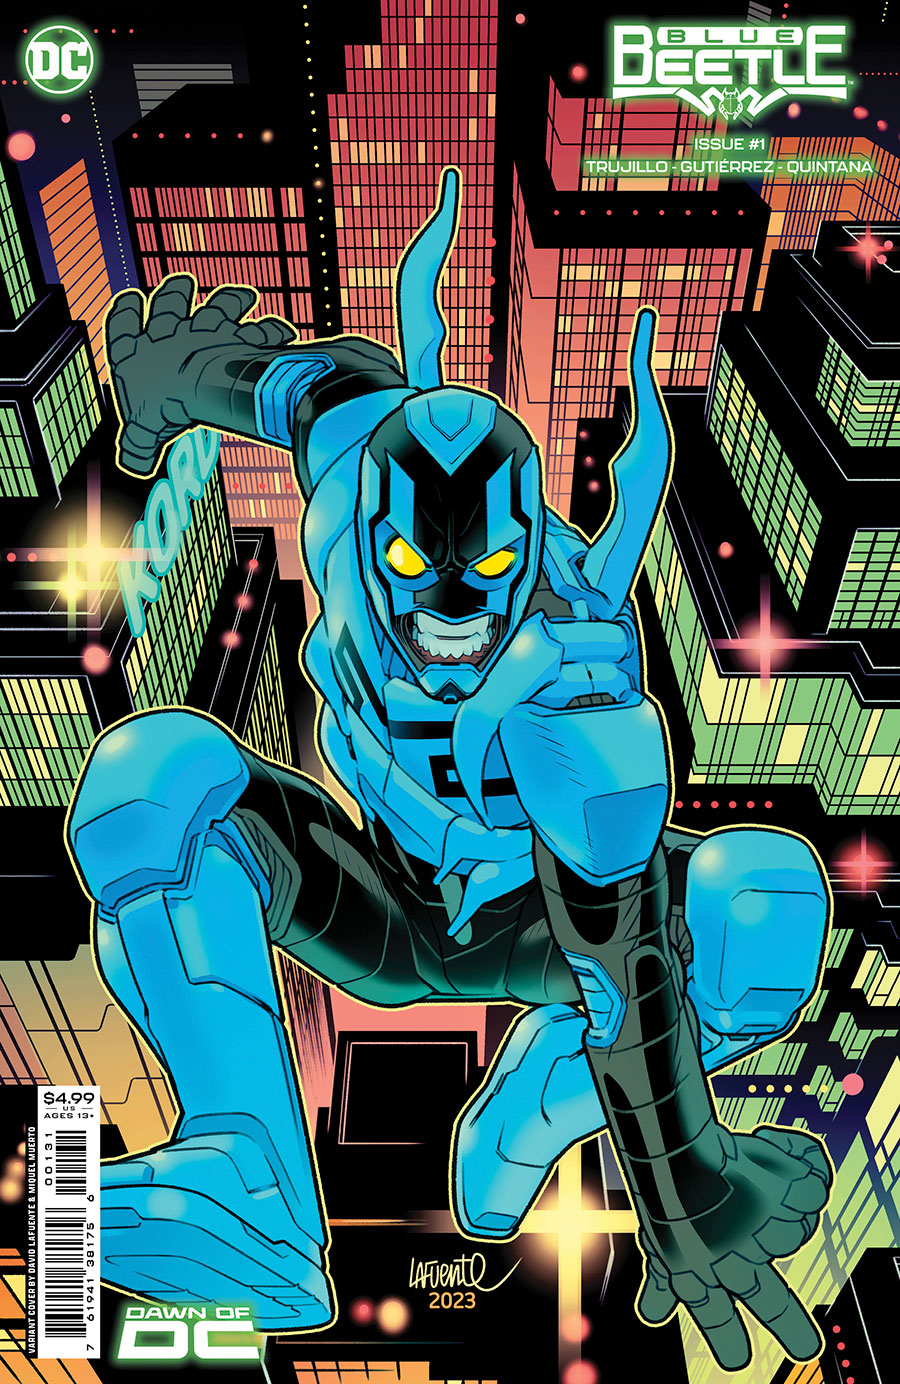 Blue Beetle (DC) Vol 5 #1 Cover B Variant David Lafuente Card Stock Cover